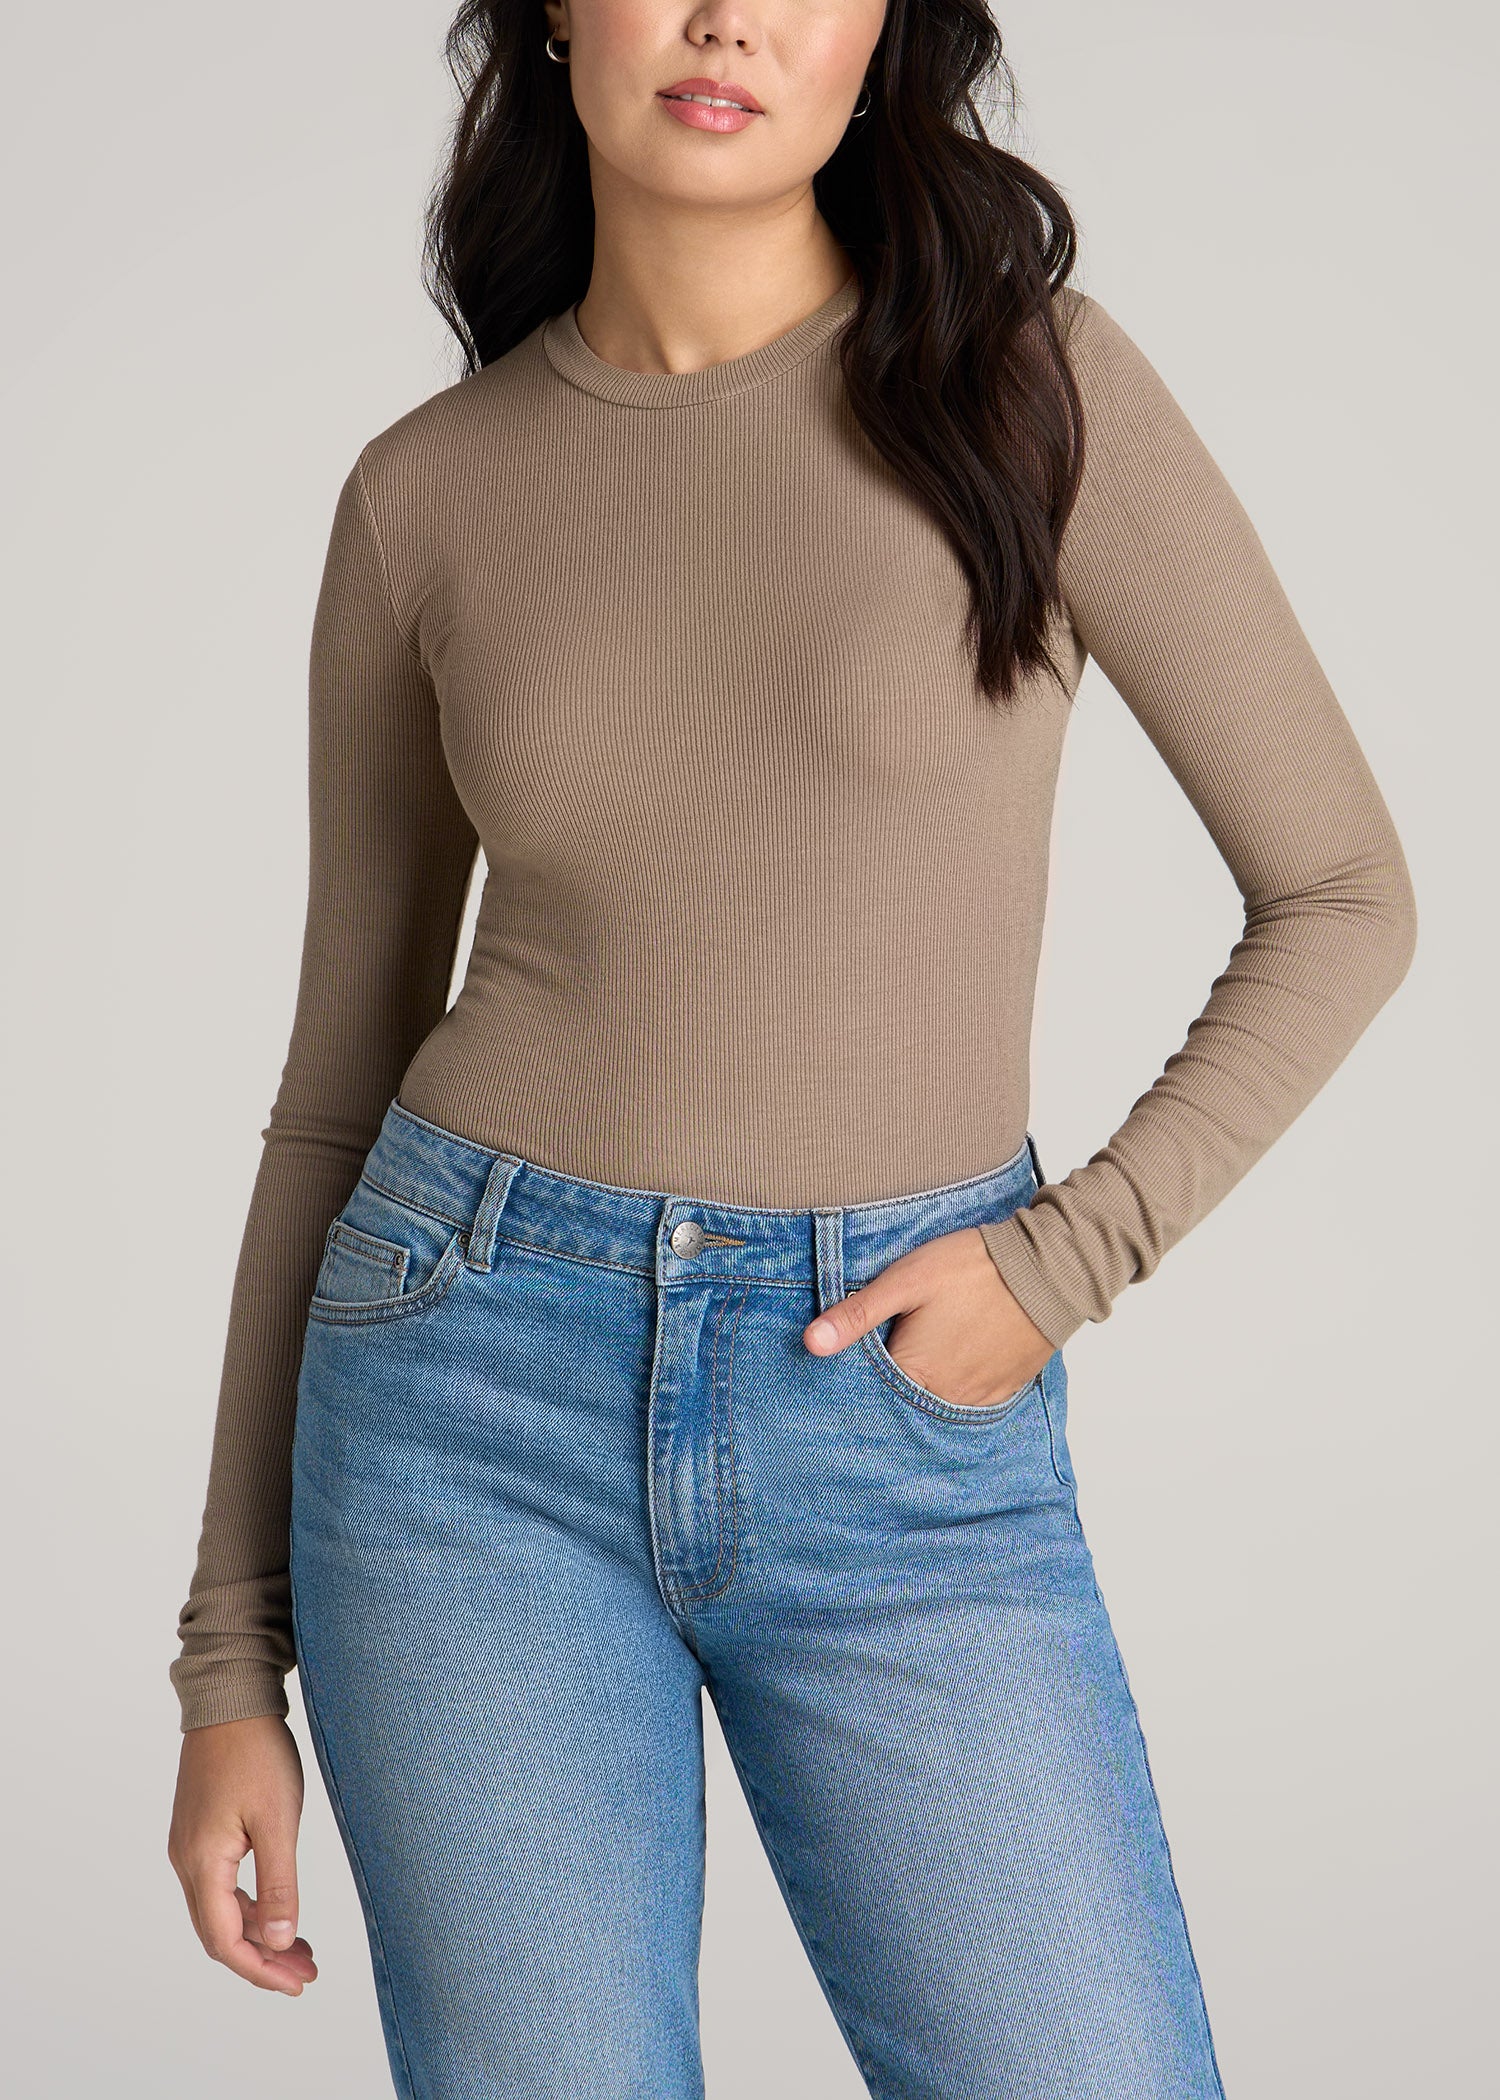 FITTED Ribbed Long Sleeve Tee in Emerald - Tall Women's Shirts